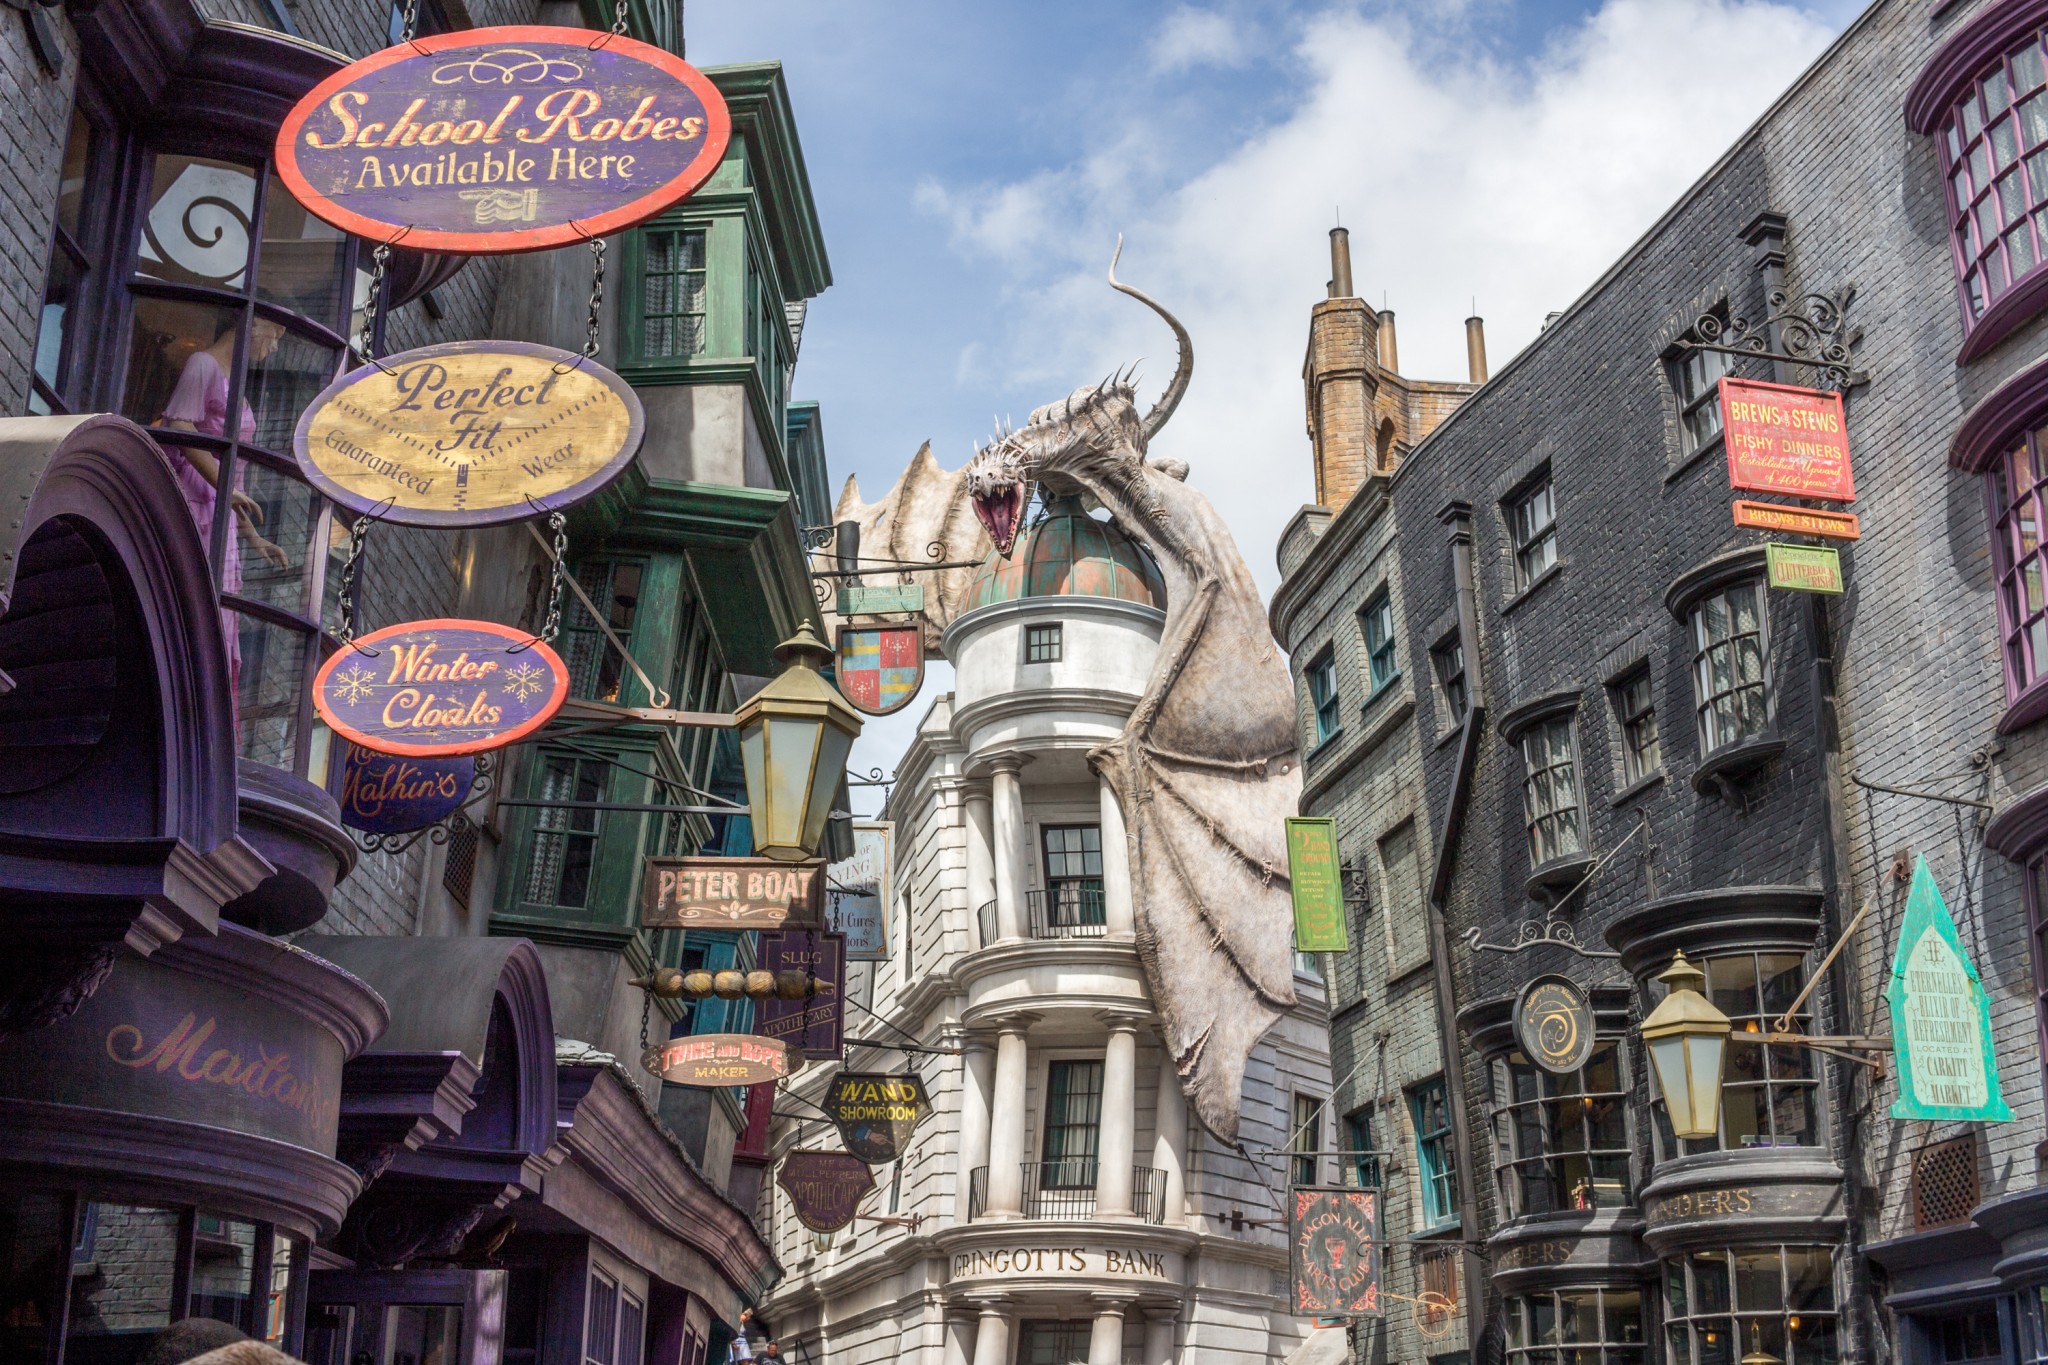 Tips for Visiting the Wizarding World of Harry Potter